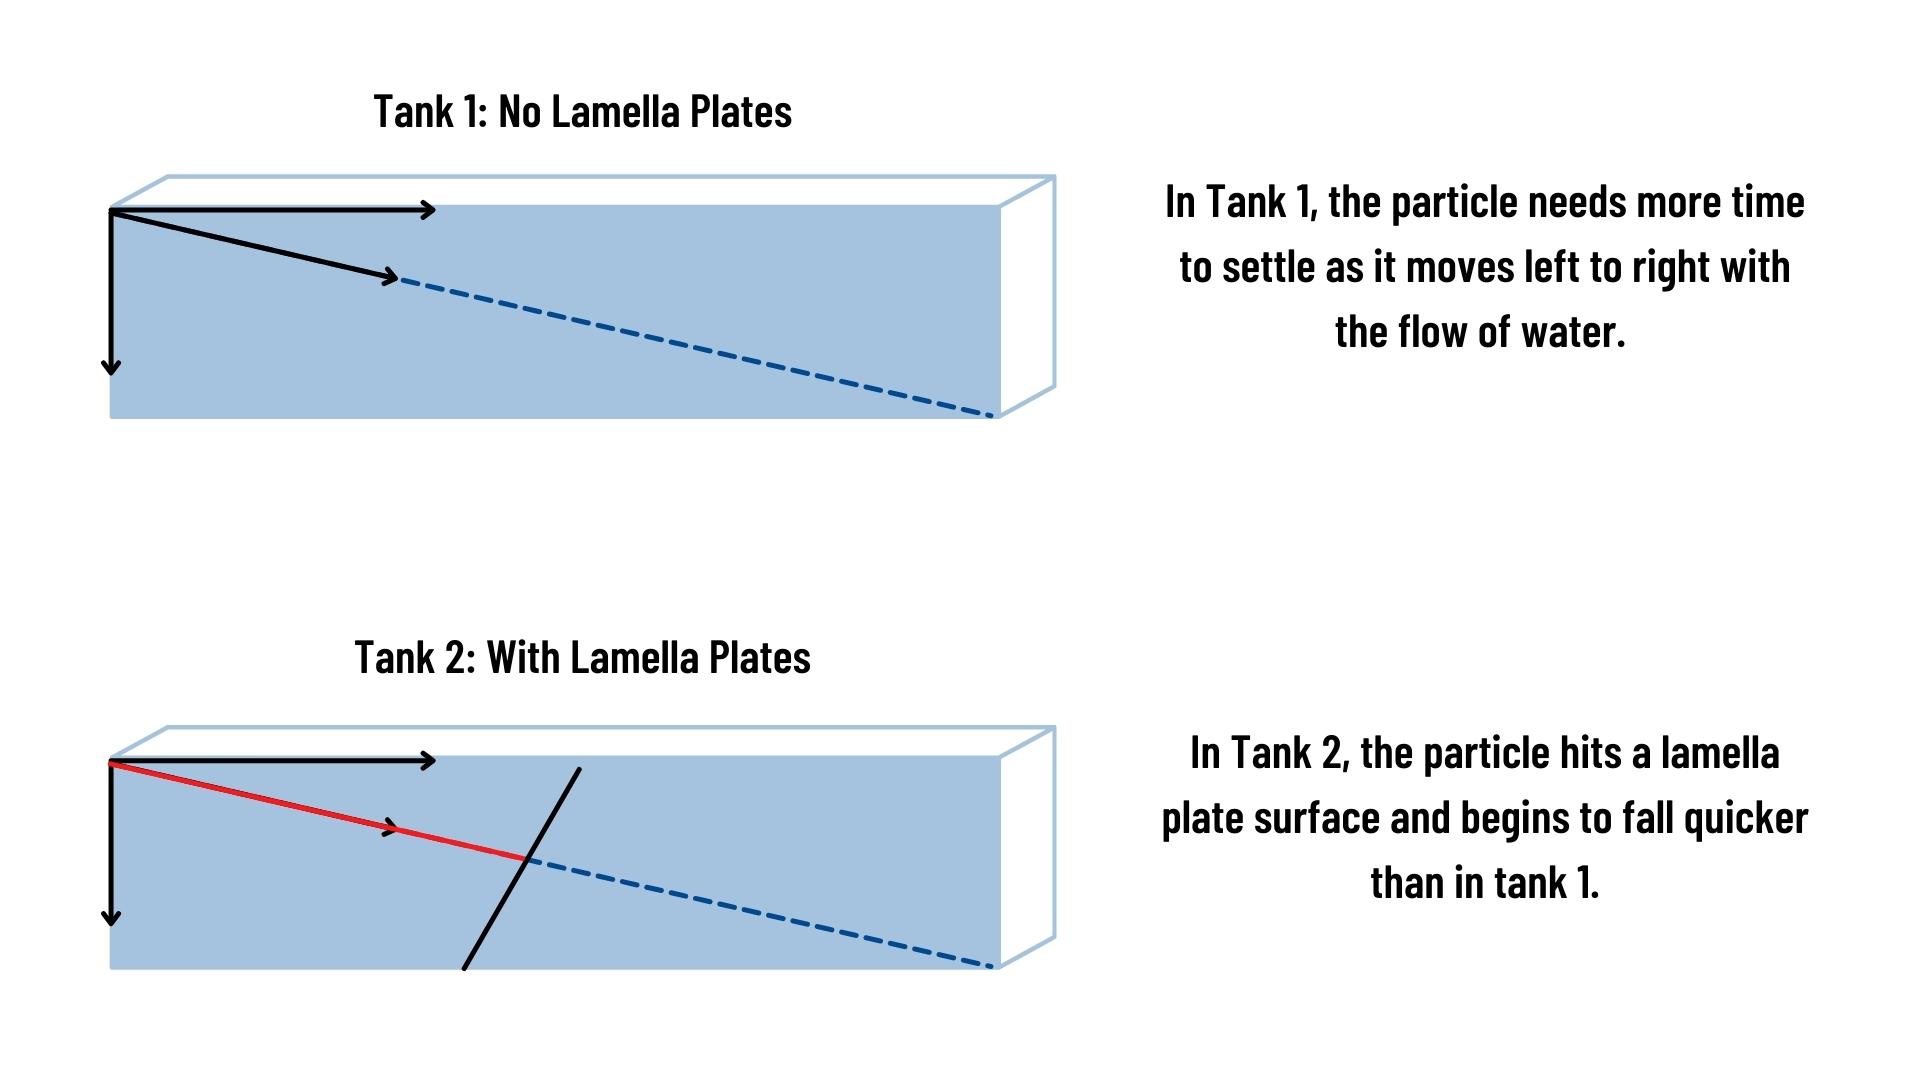 Two digital drawings in one image showing how a particle settles in water with and without lamella plates.